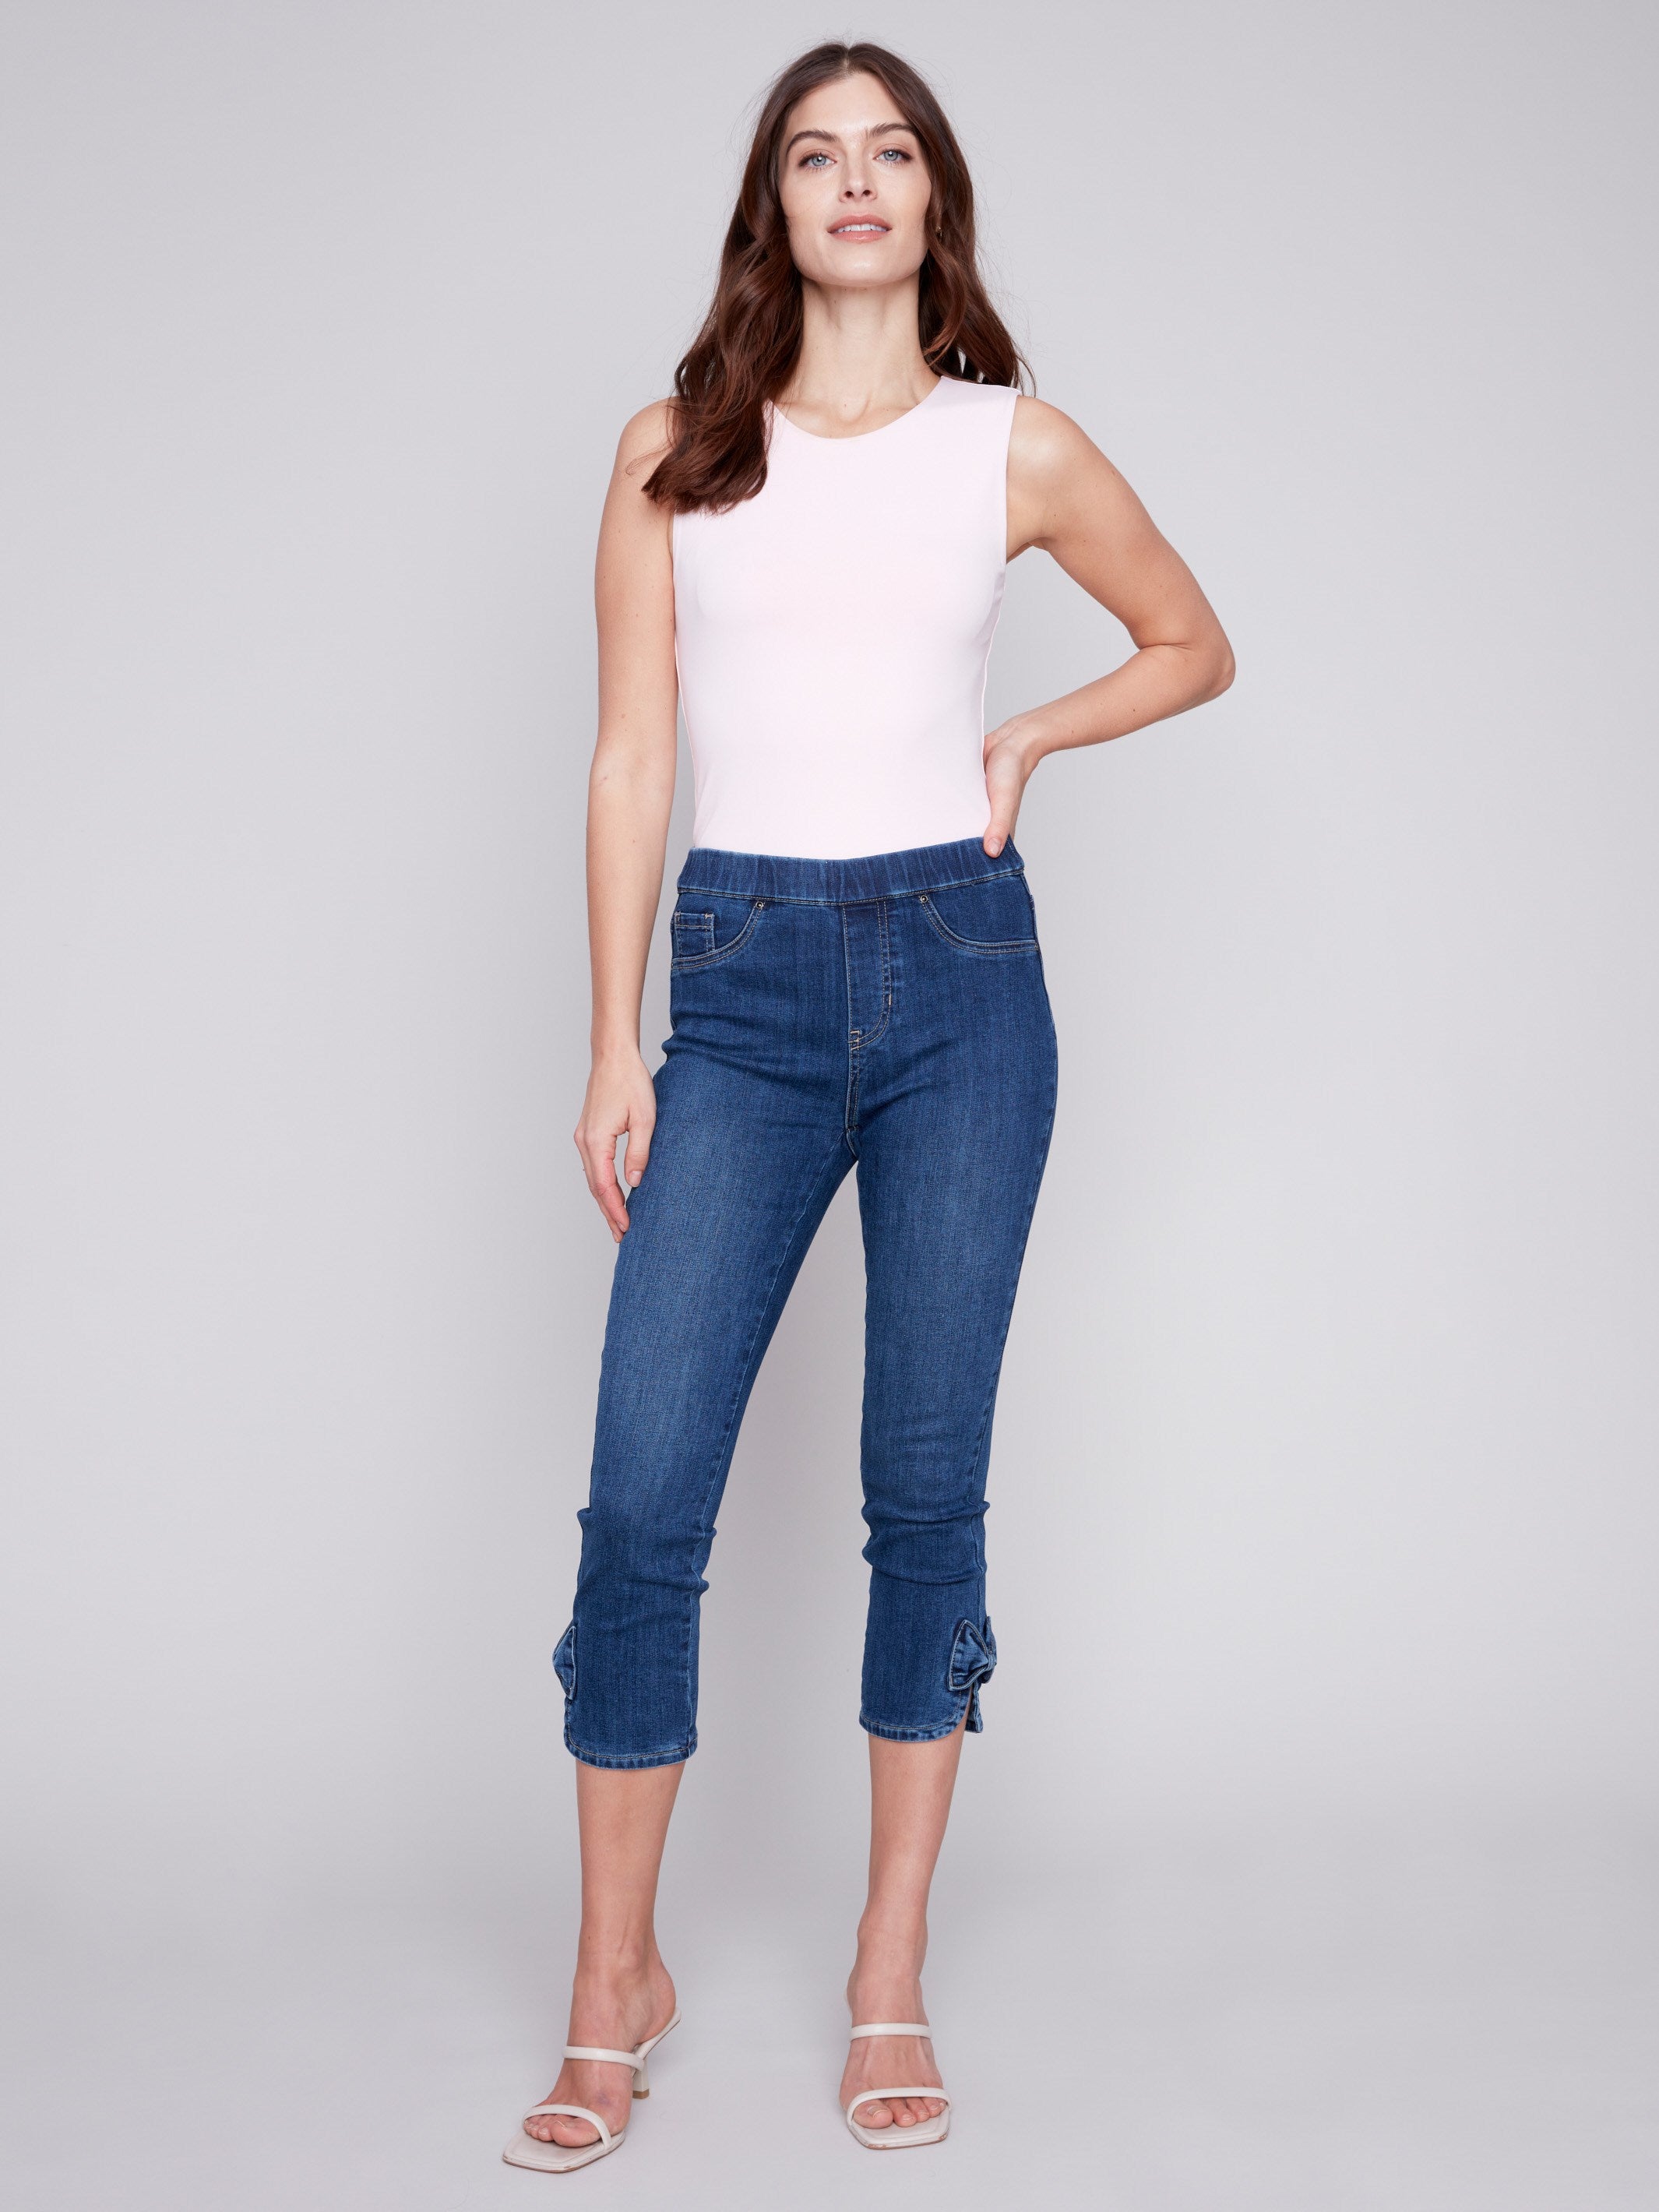 Pull-On Jeans with Bow Detail - Indigo - Charlie B Collection Canada - Image 4